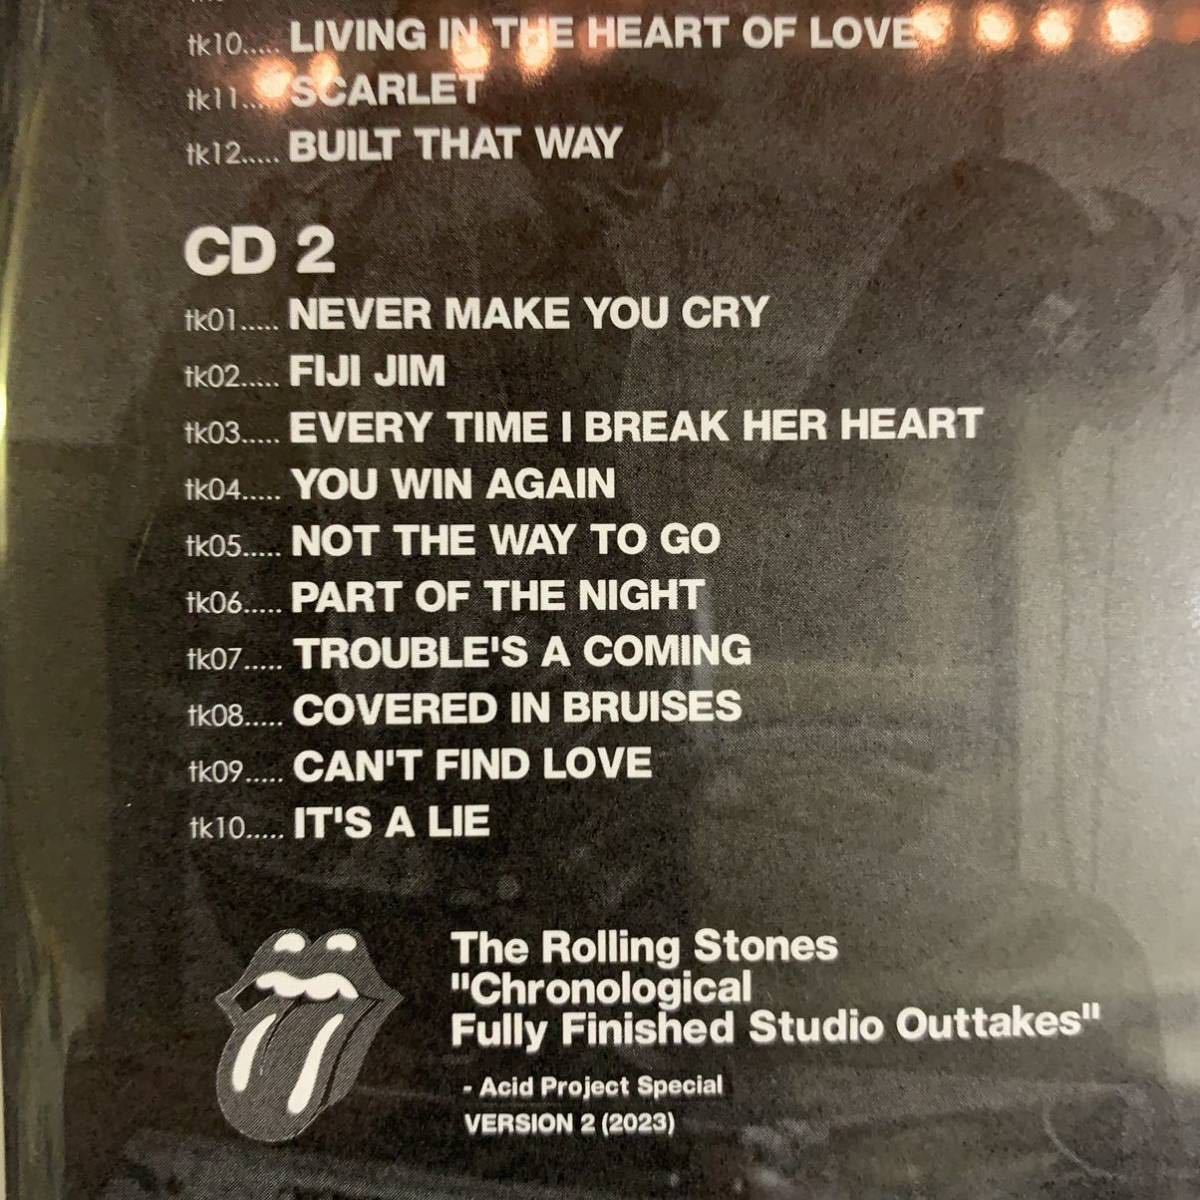 THE ROLLING STONES / Chronological Fully Finished Studio Outtakes Acid Project Special Version 2 (2023) 4CD 最新バージョン！_画像4